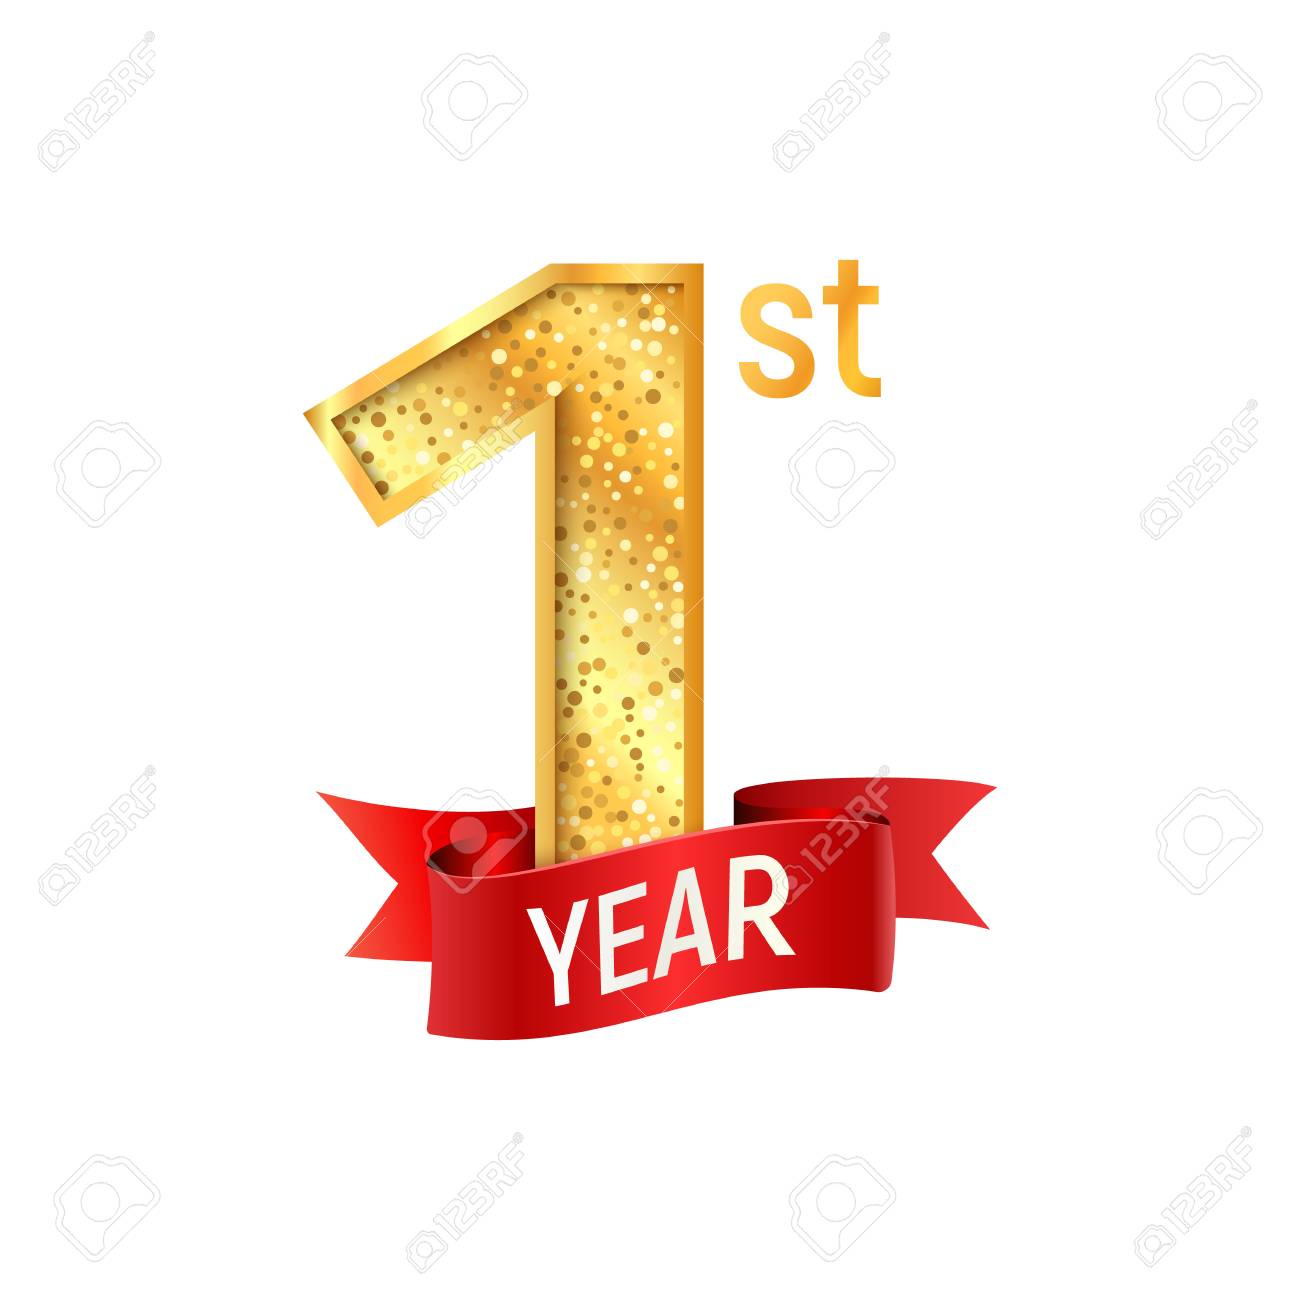 First year celebration template. Golden number one with red ribbon on white background vector illustration